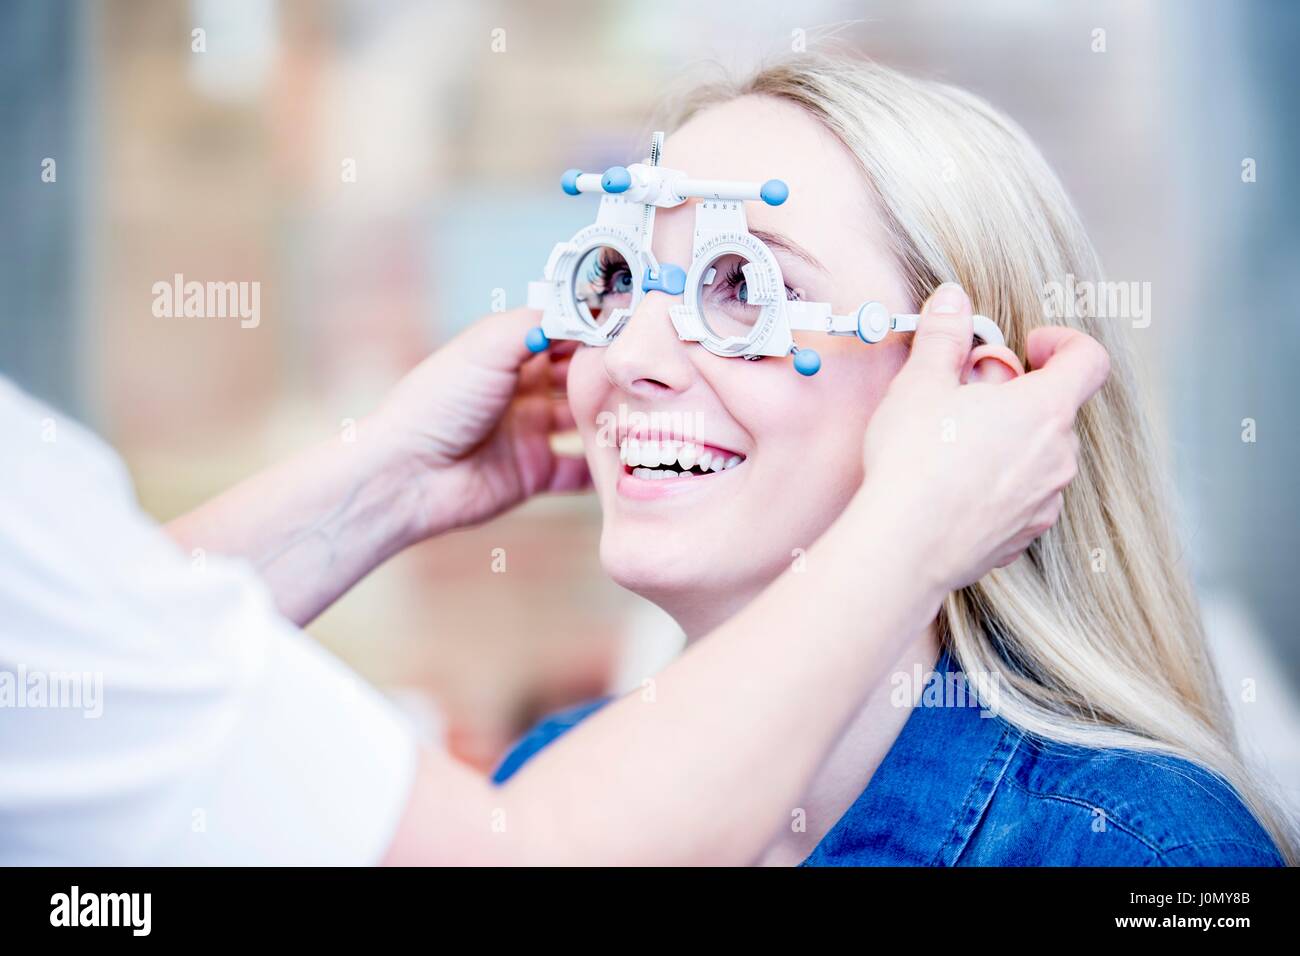 Cheerful young woman having eye exam performed by optometrist. Stock Photo